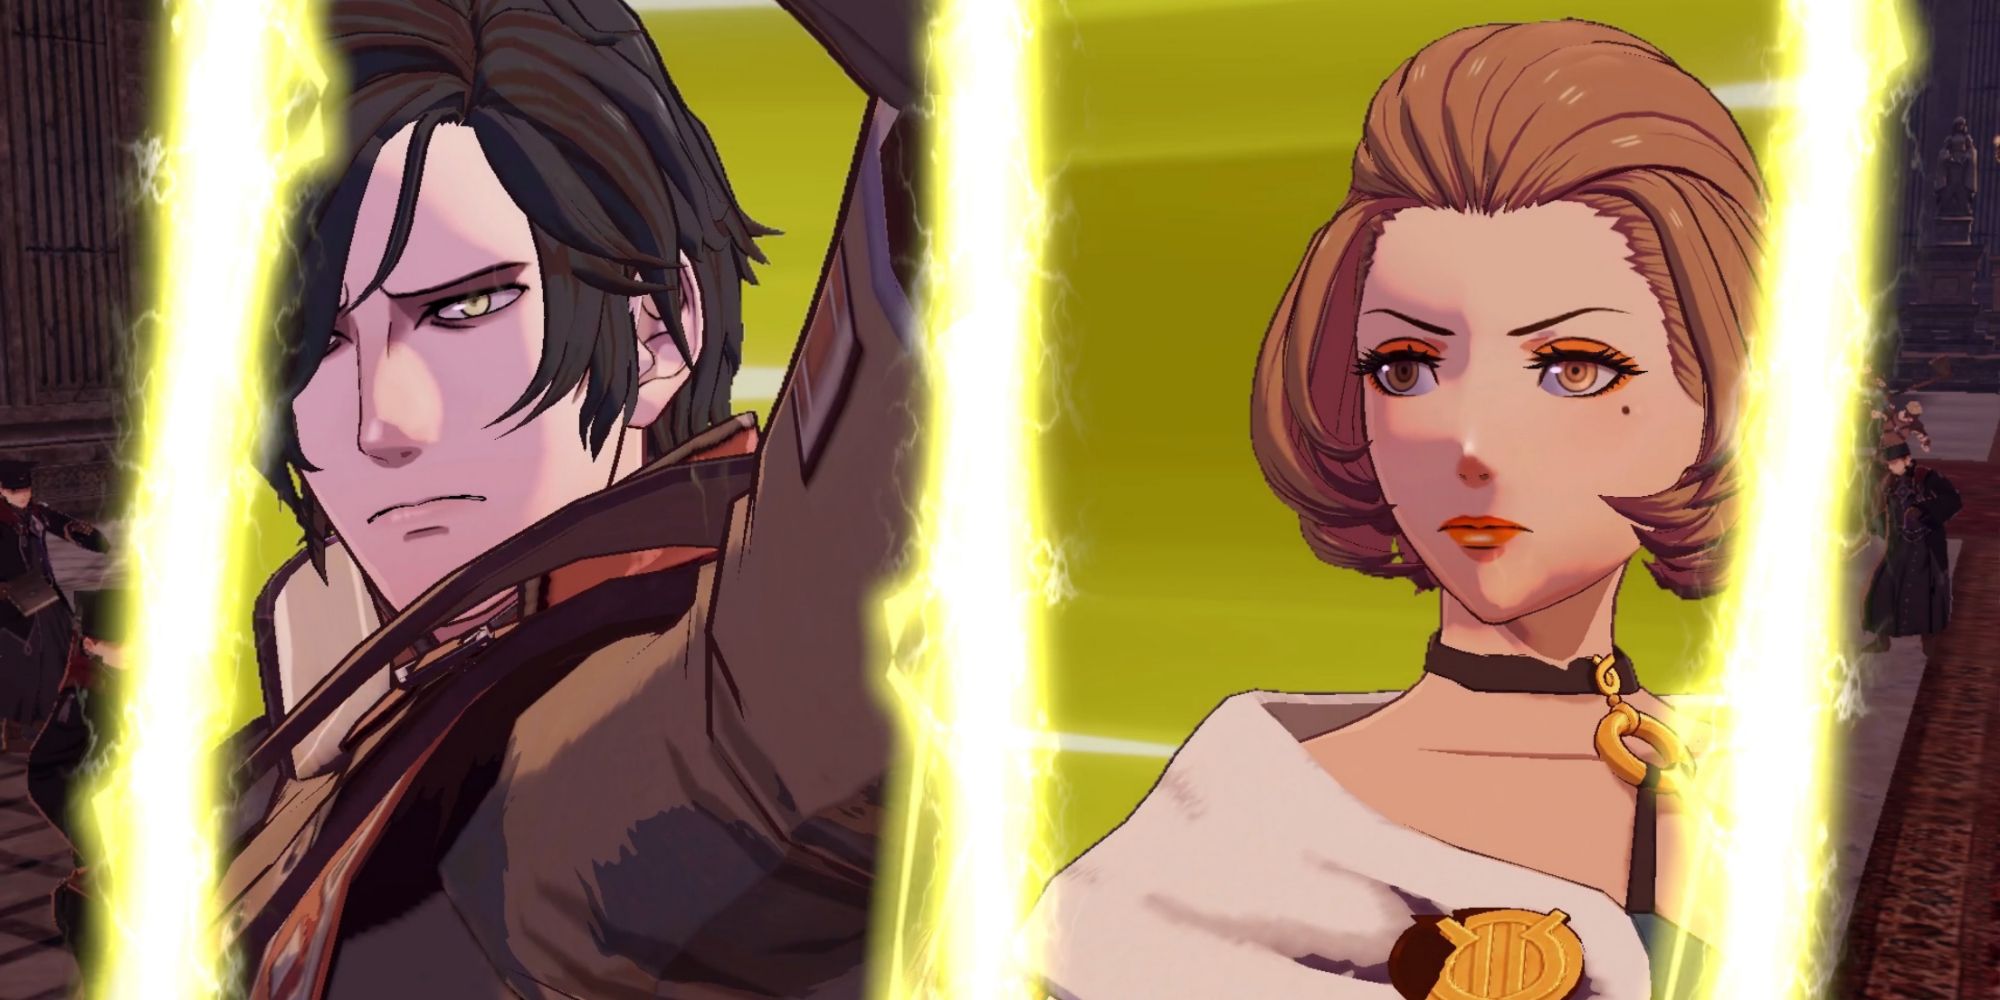 Hubert and Manuela team up to attack with a flashy yellow split screen cutscene